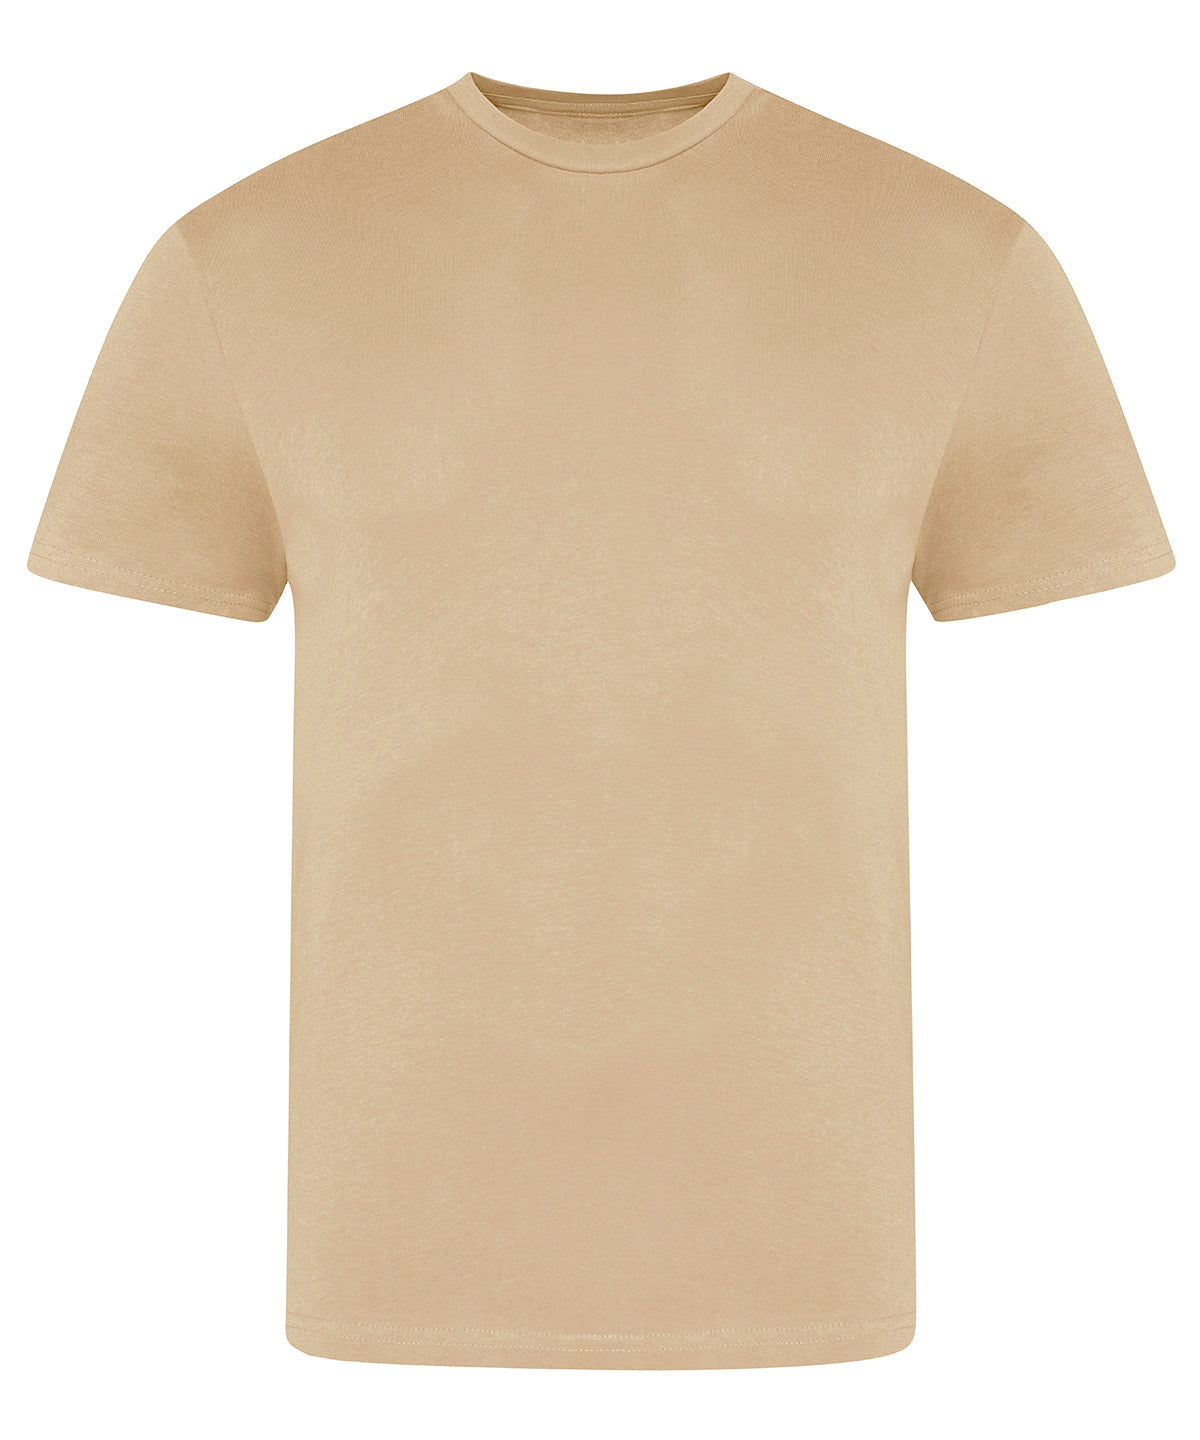 Personalised T-Shirts - Mid Brown AWDis Just T's The 100 T